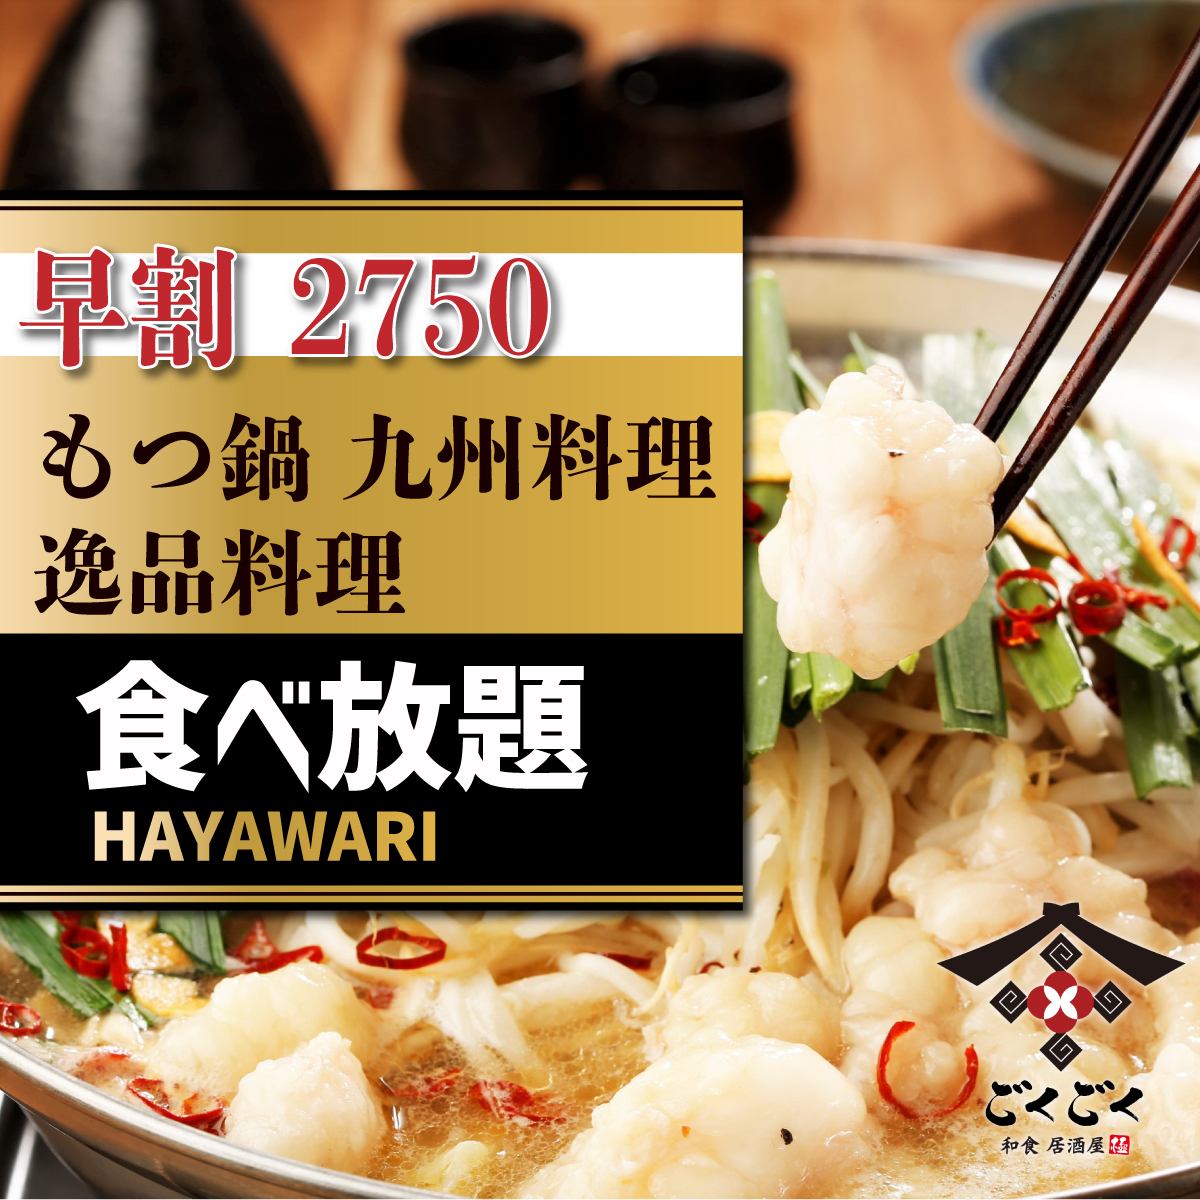 All-you-can-eat and drink is available from 2,750 yen on weekdays to 4,000 yen for unlimited hours!